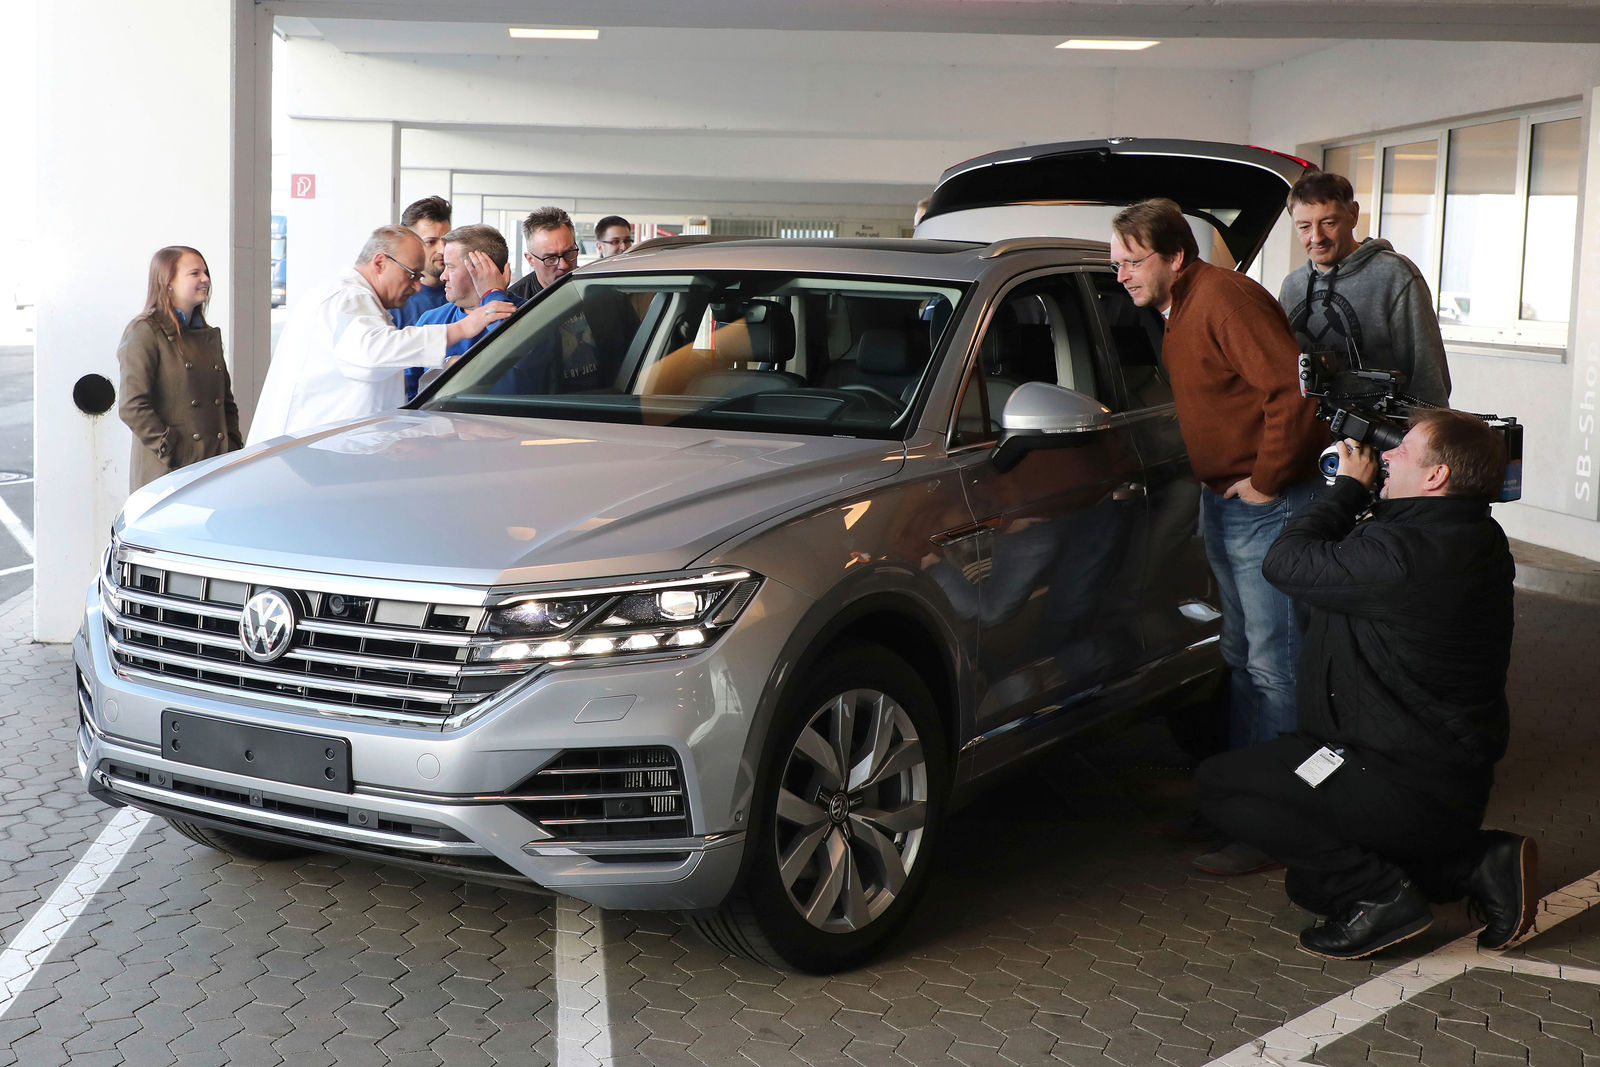 Story: The new Touareg – A Reason to be Proud